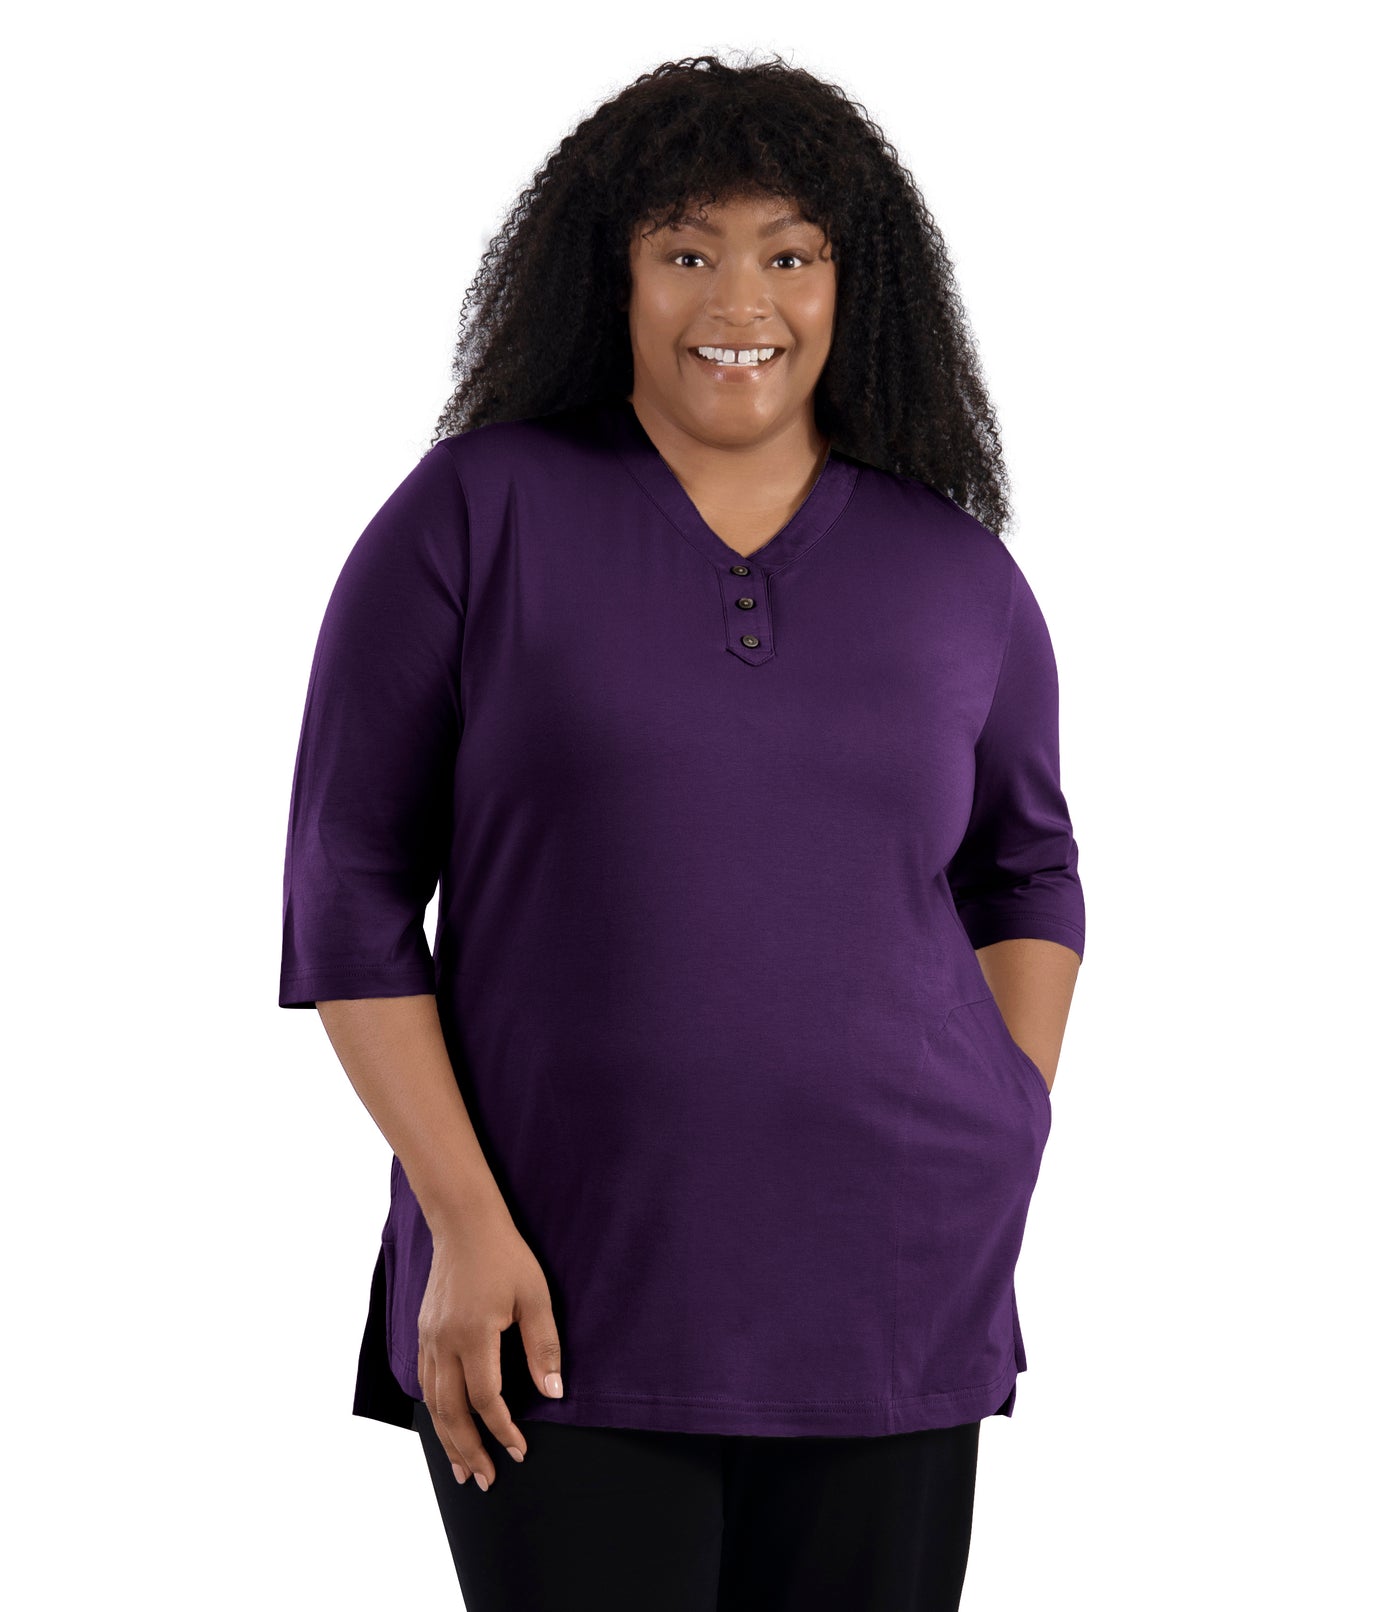 JunoActive Model wearing Stretch Naturals Lite 3/4 Sleeve Button Henley, facing front, one hand in pocket of shirt and other by her side. Color deep plum. 